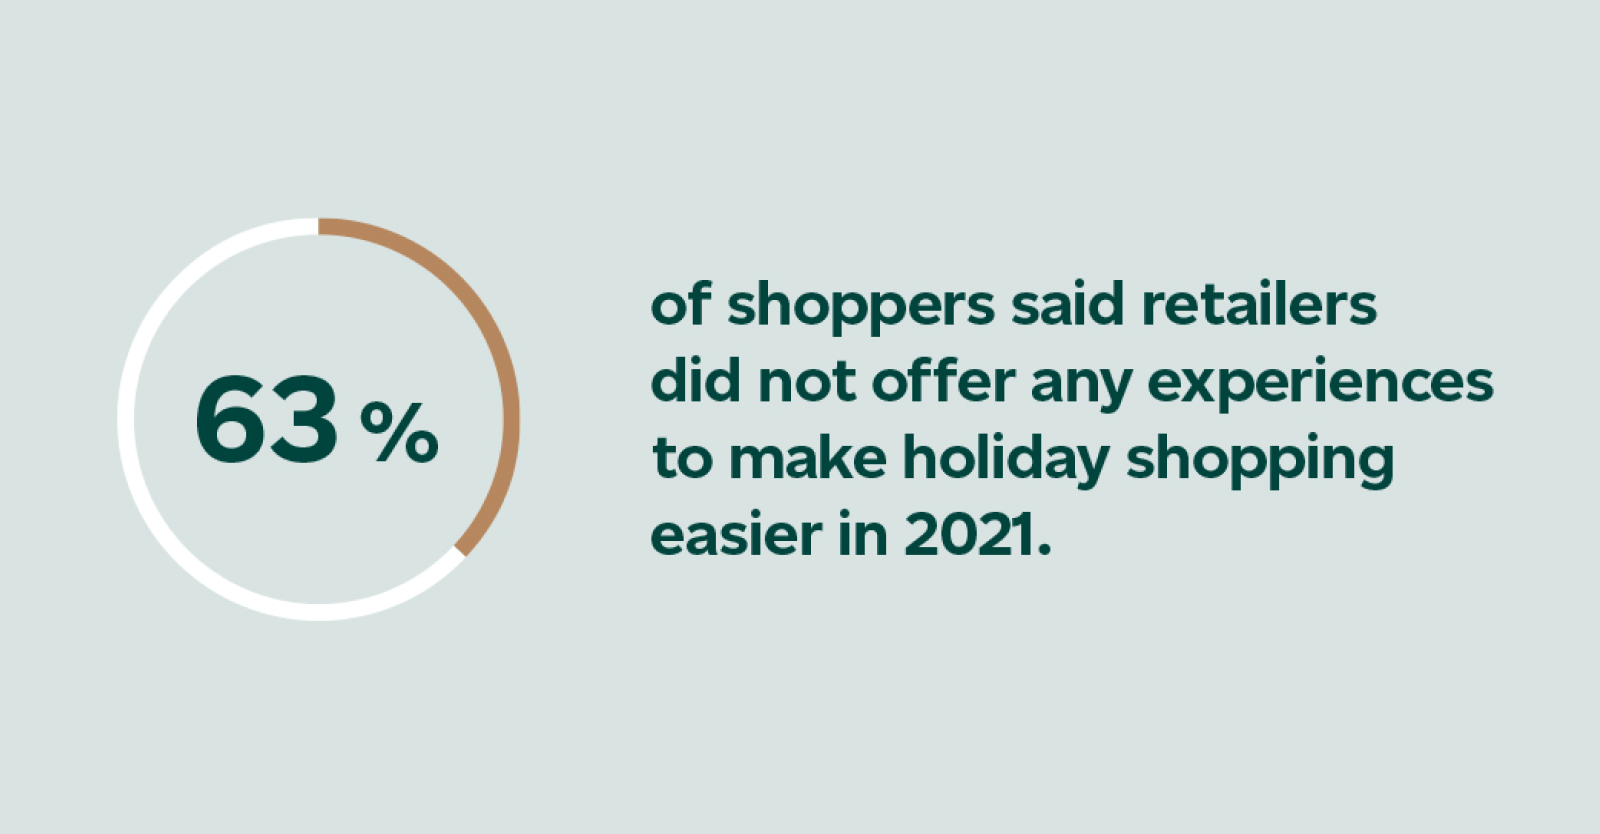 63% of shoppers said retailers did not offer any experiences to make holiday shopping easier in 2021.